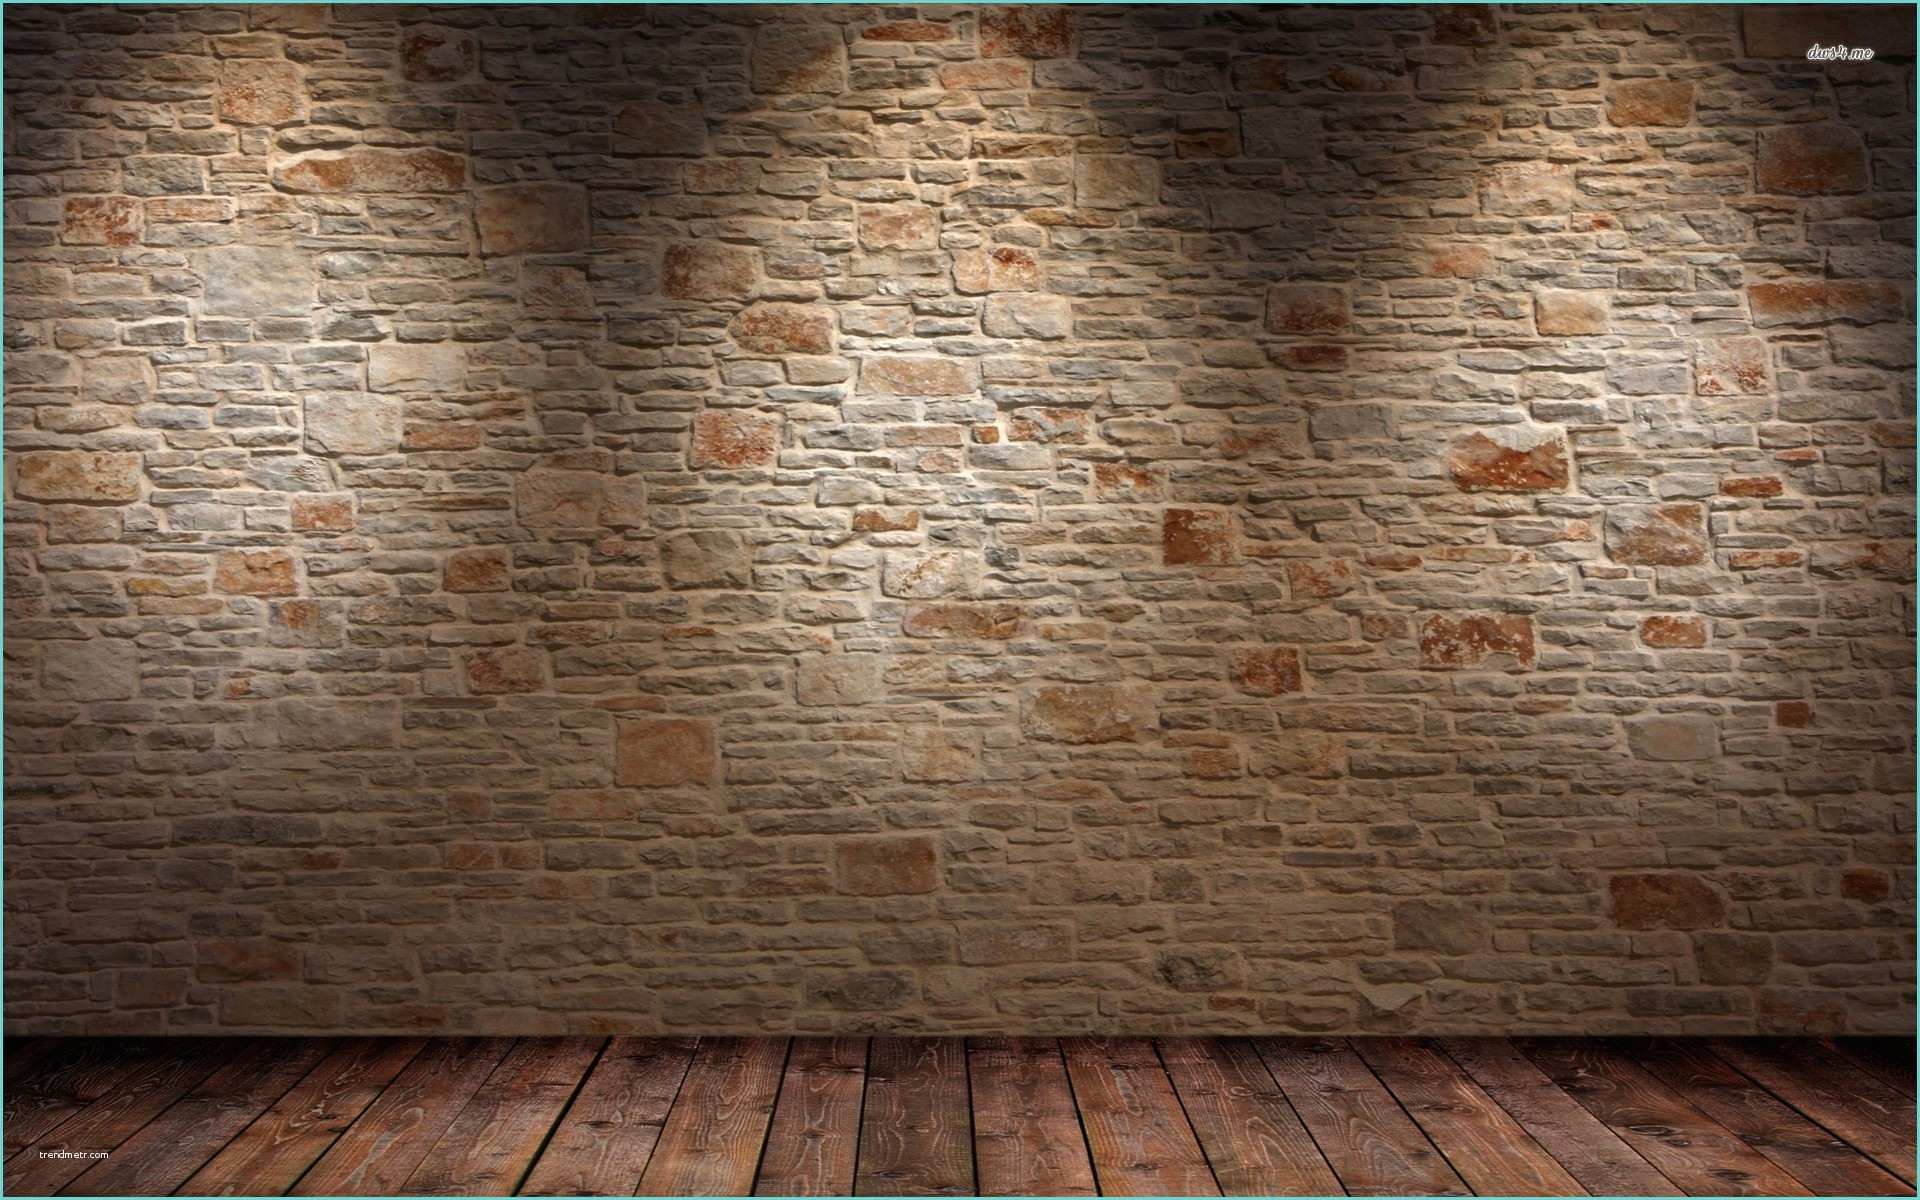 White Brick Wall and Floor Wooden Floor Clipart Brick Wallpaper Pencil and In Color